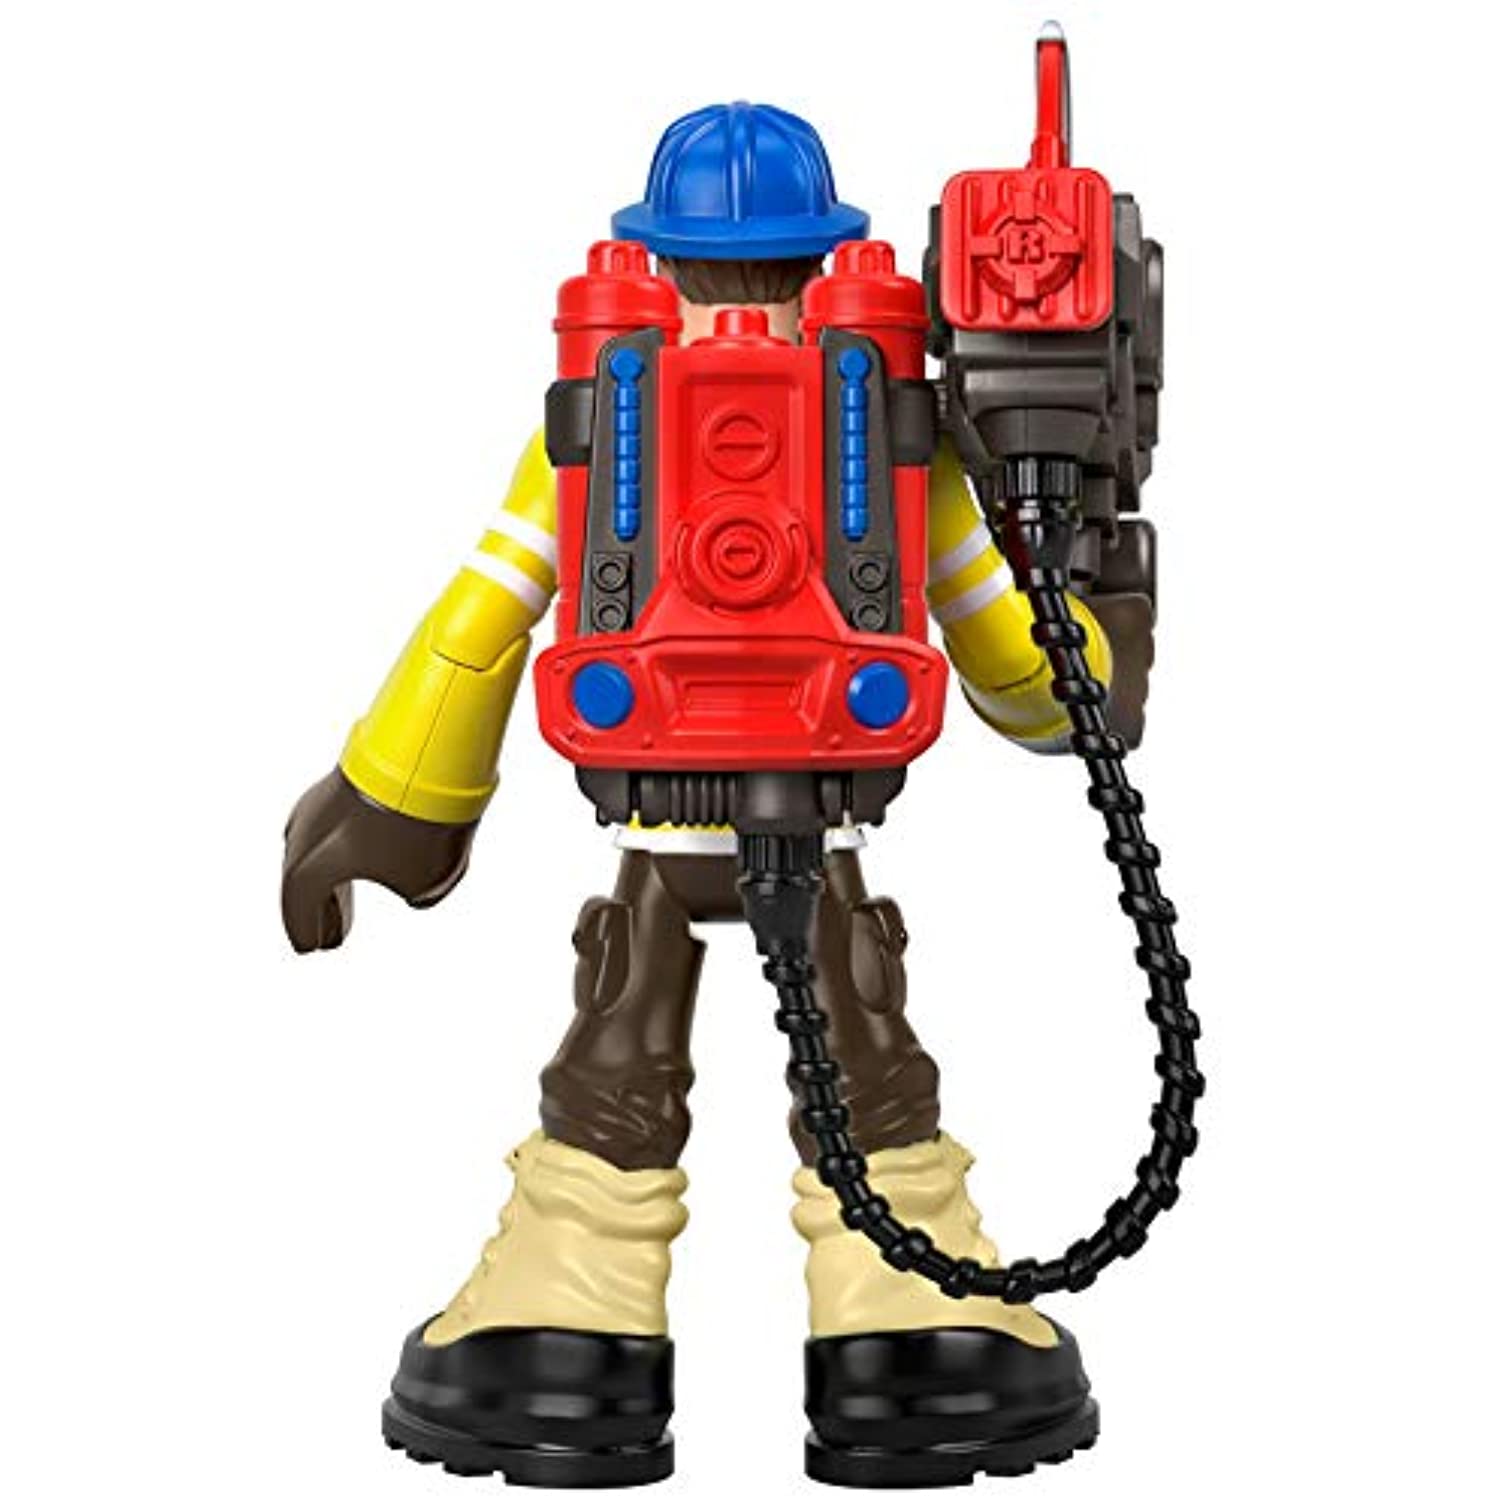 Fisher-Price Rescue Heroes Forrest Fuego, 6-Inch Figure with Accessories